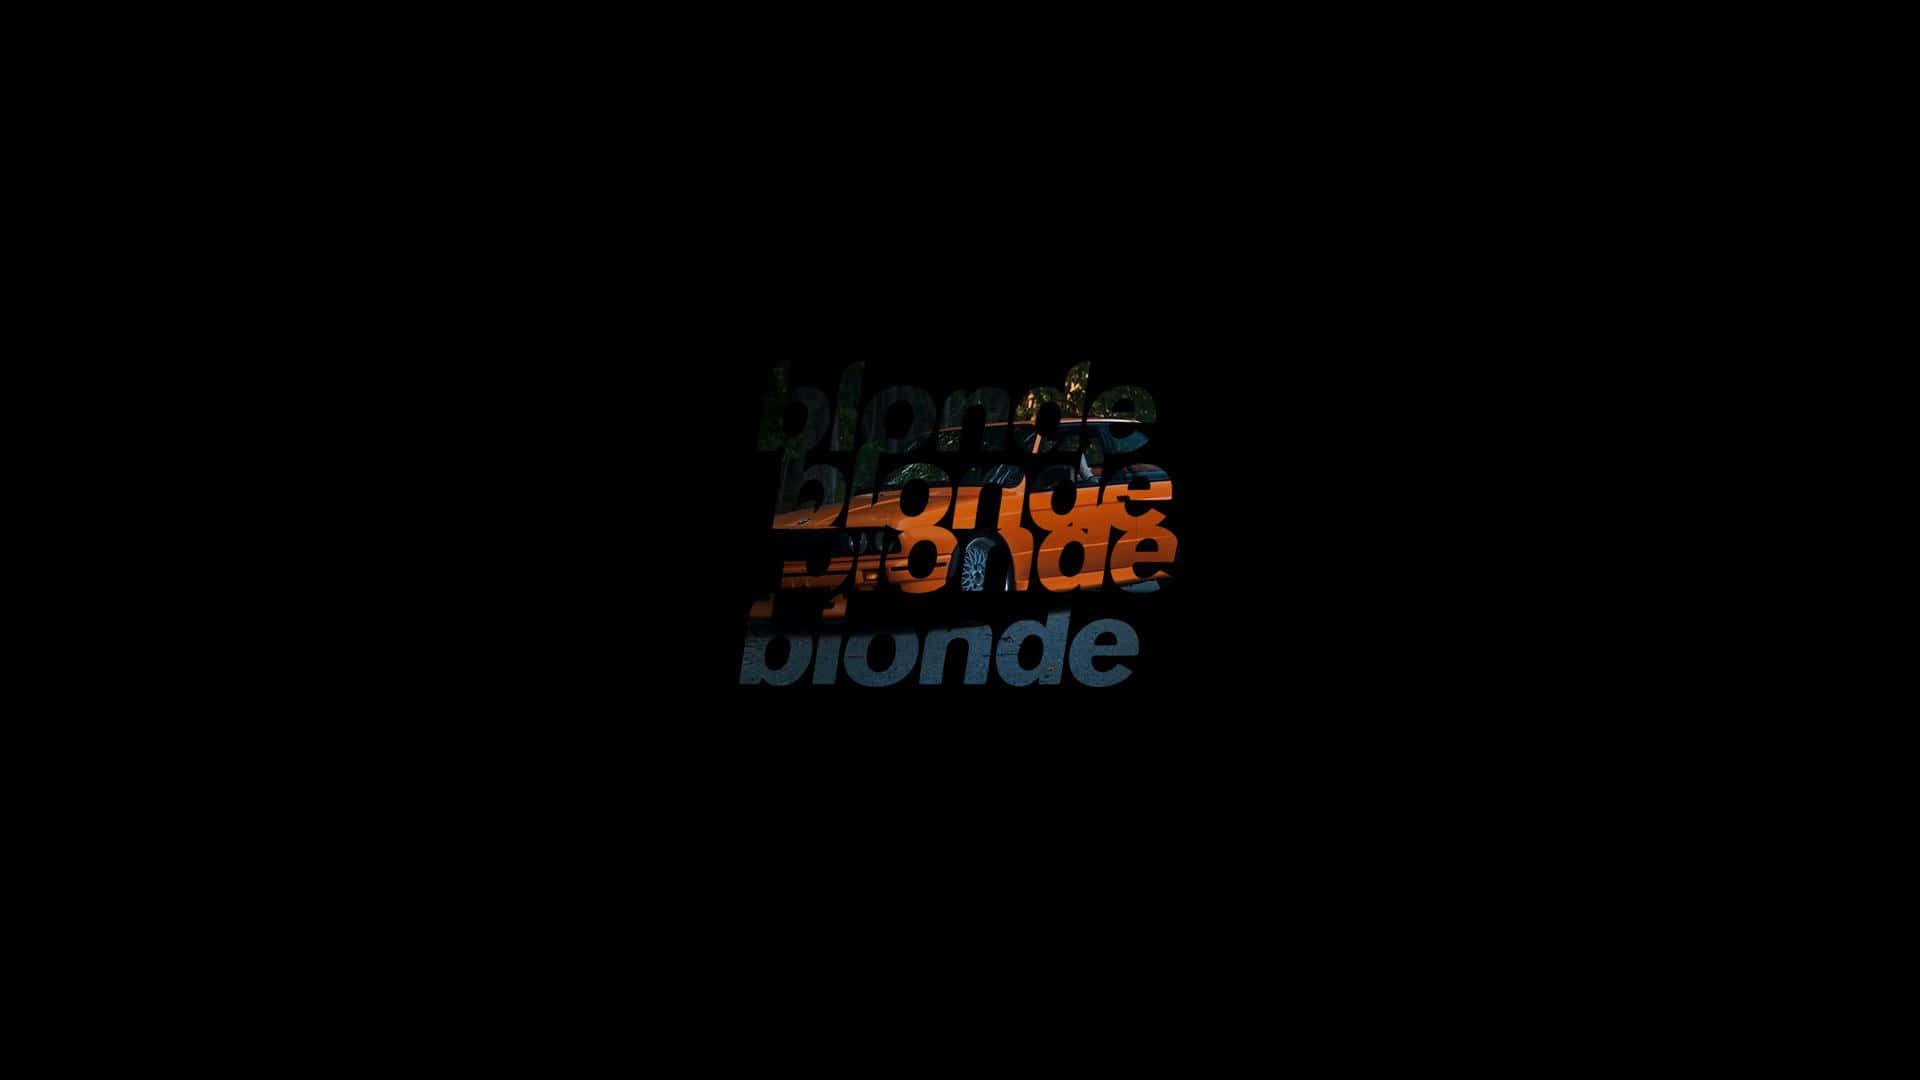 Förloradig I Frank Oceans Blonde (as A Suggestion For A Computer Or Mobile Wallpaper Featuring The Album Cover Of Blonde) Wallpaper